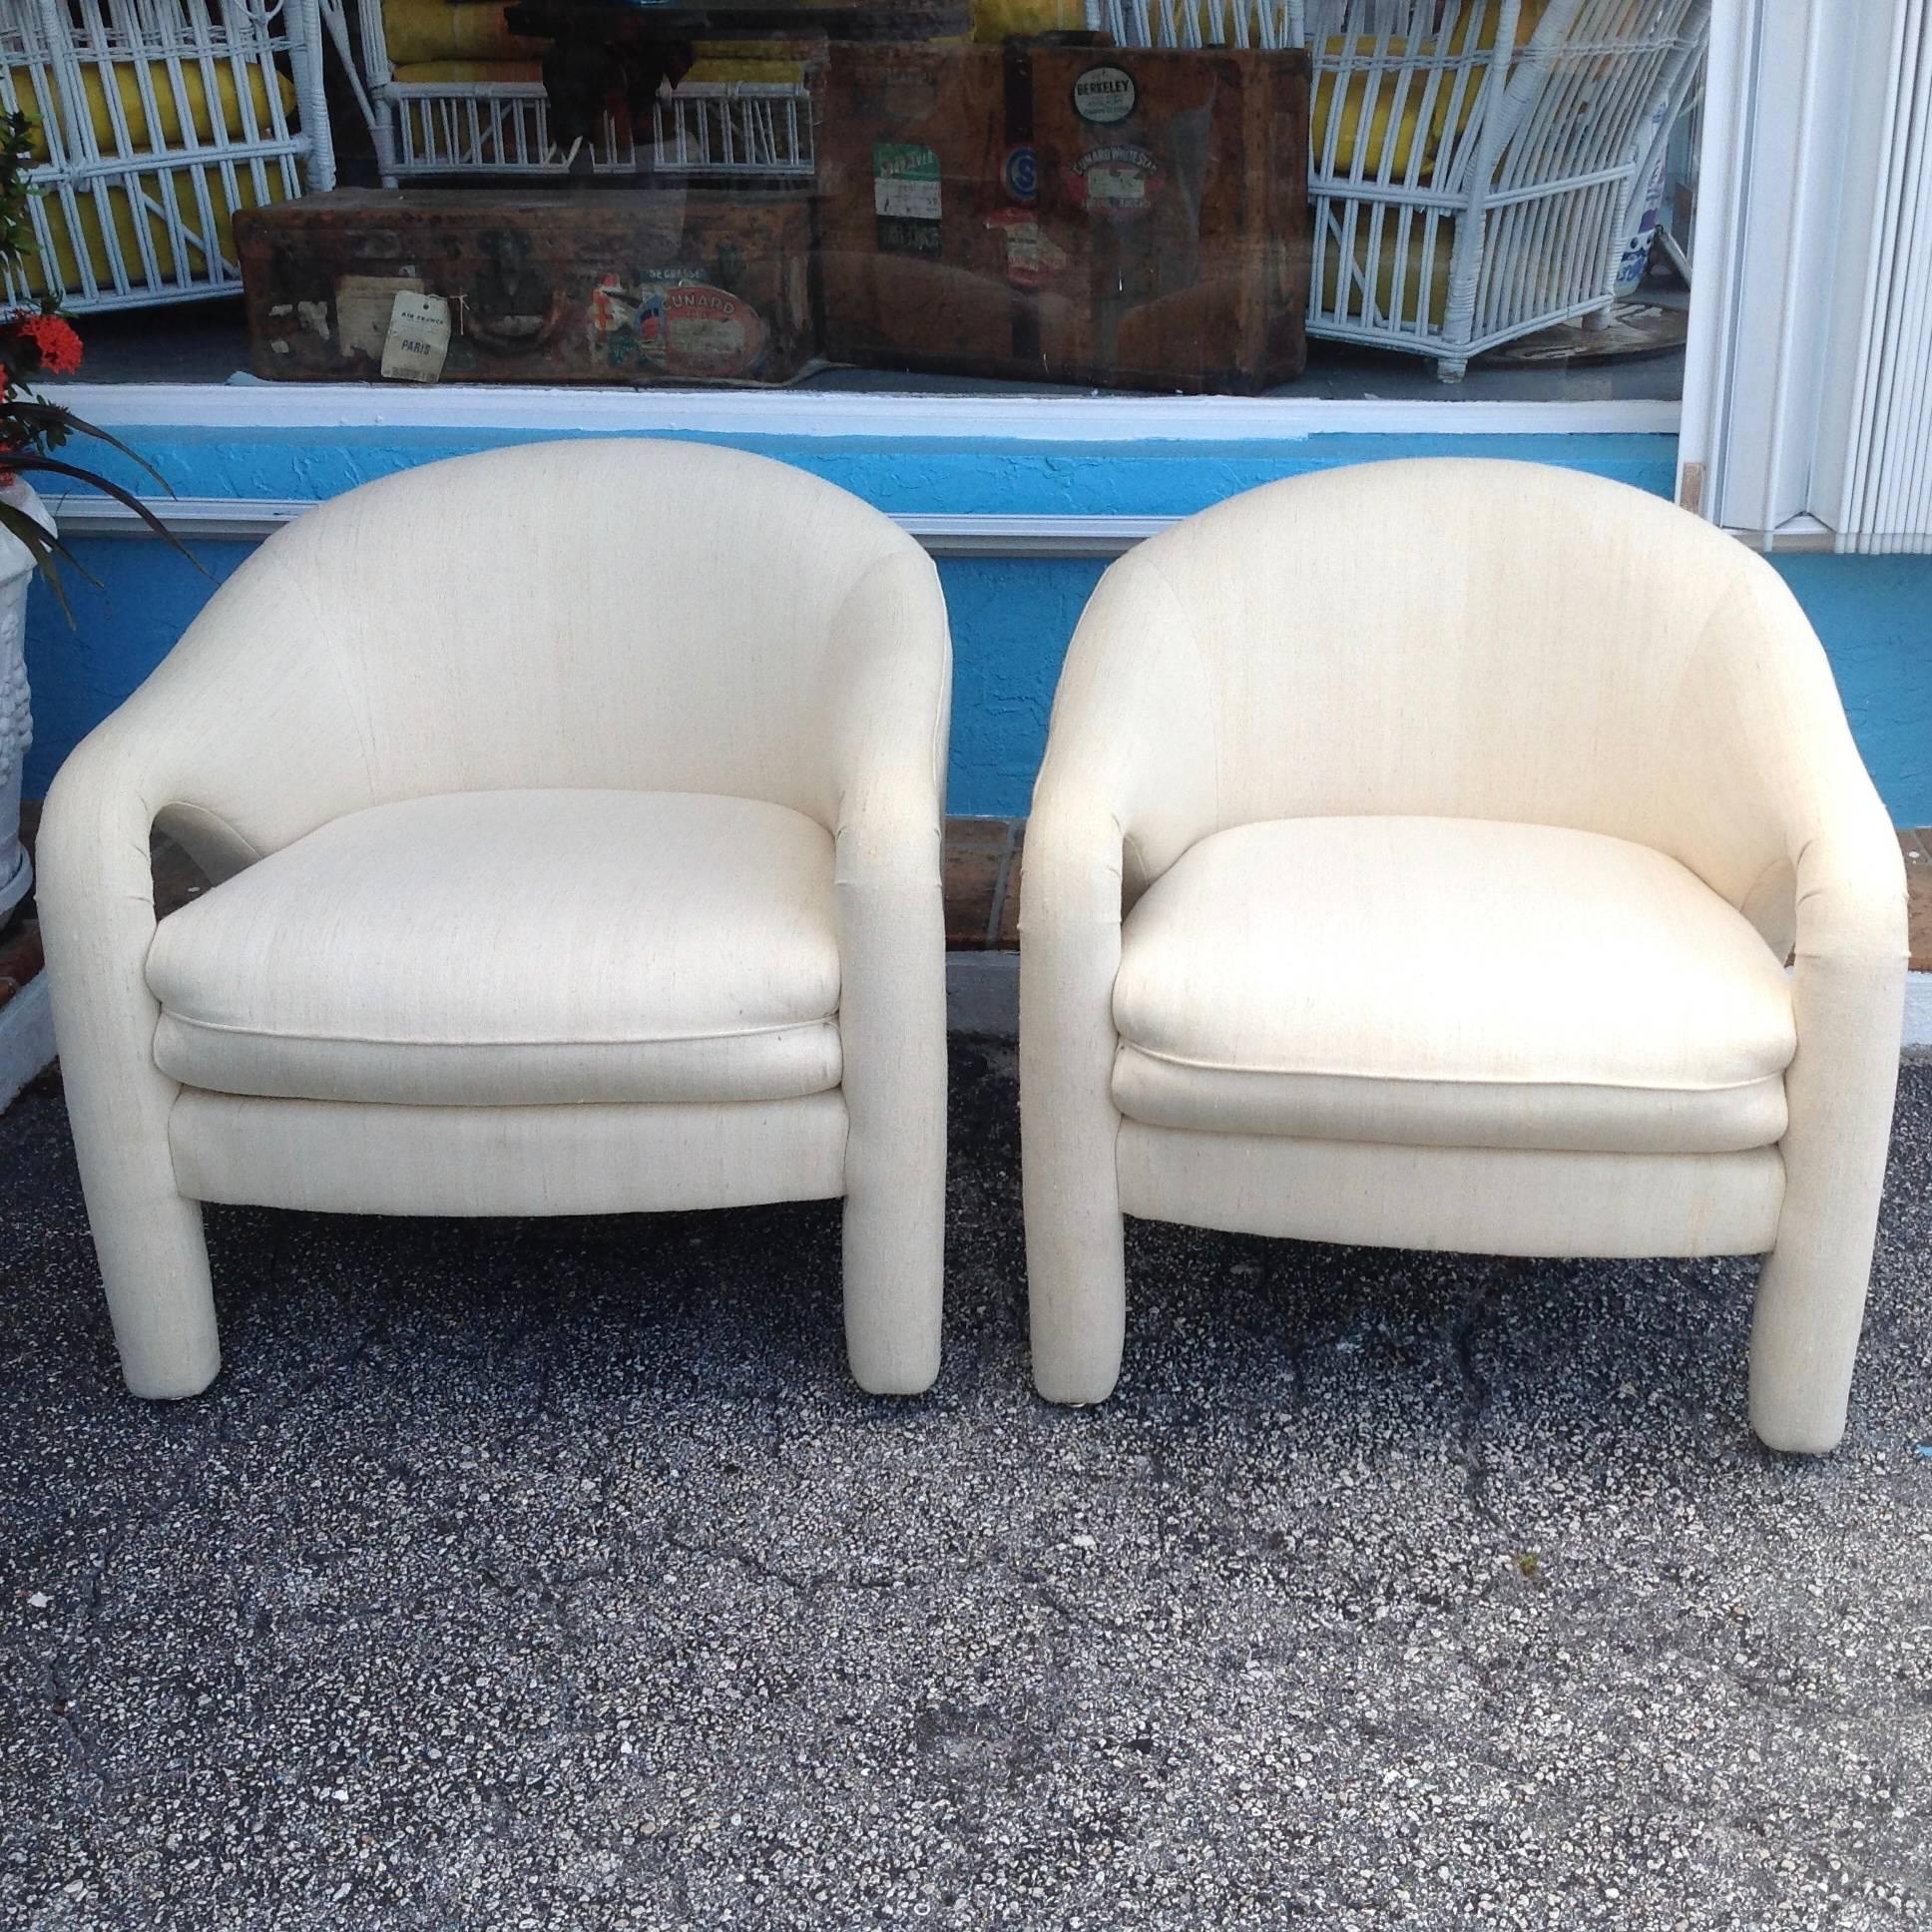 A superb pair of lounge chairs inspired by the iconic designer. 
Generously scaled with swooping lines and covered in lovely ivory linen.
Bearing the Weiman labels.